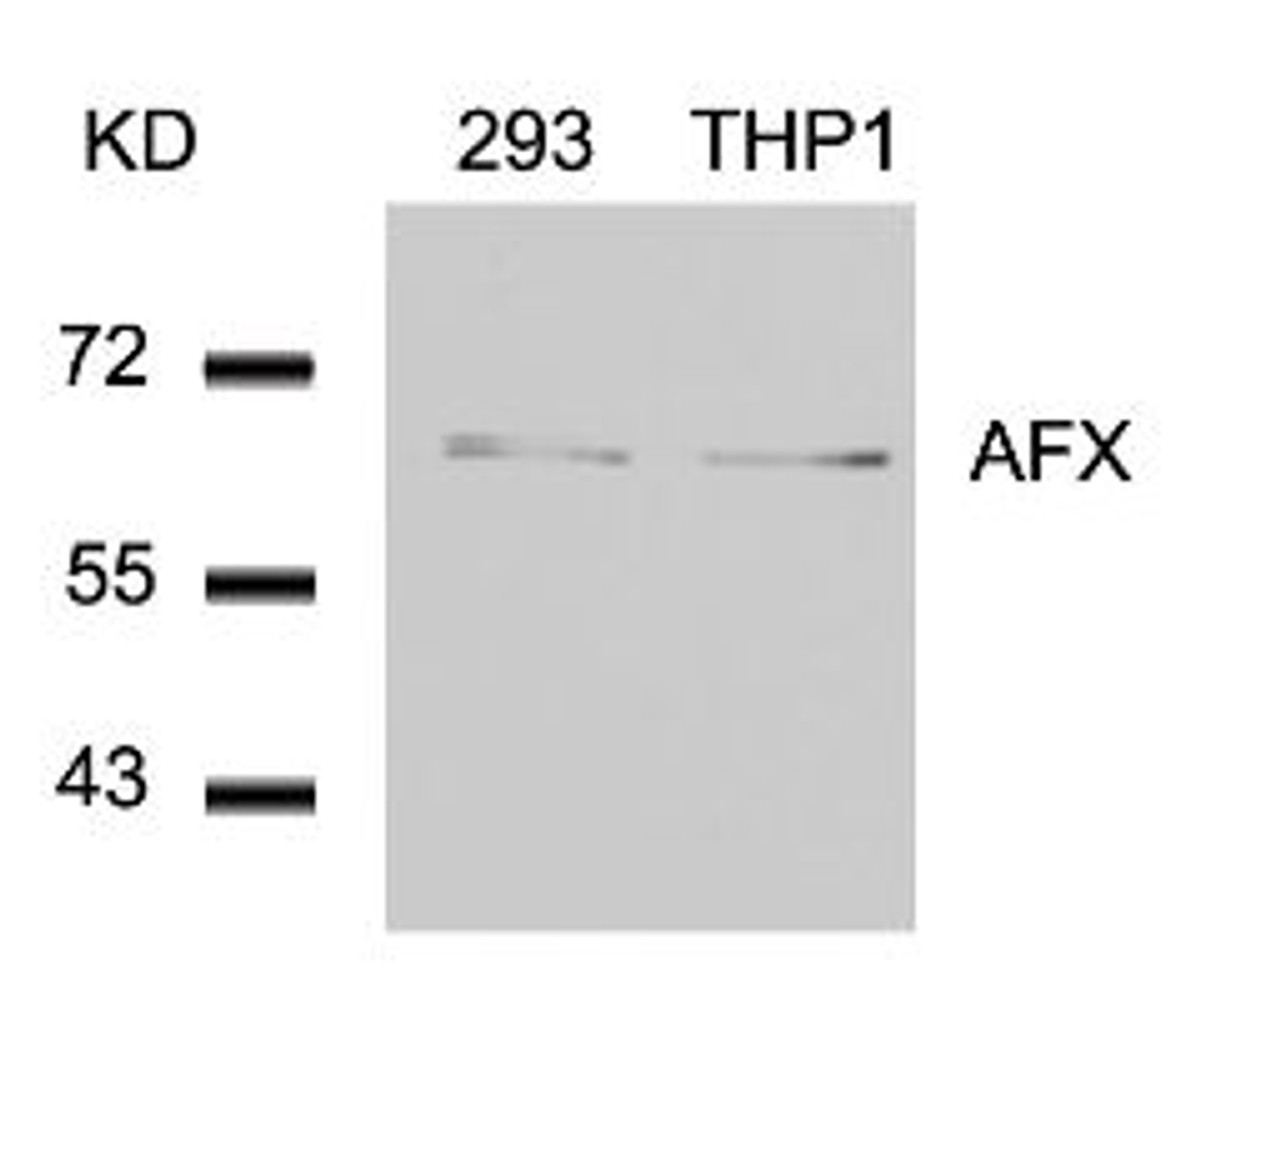 Western blot analysis of lysed extracts from 293 and THP1 cells using AFX (Ab-197) .